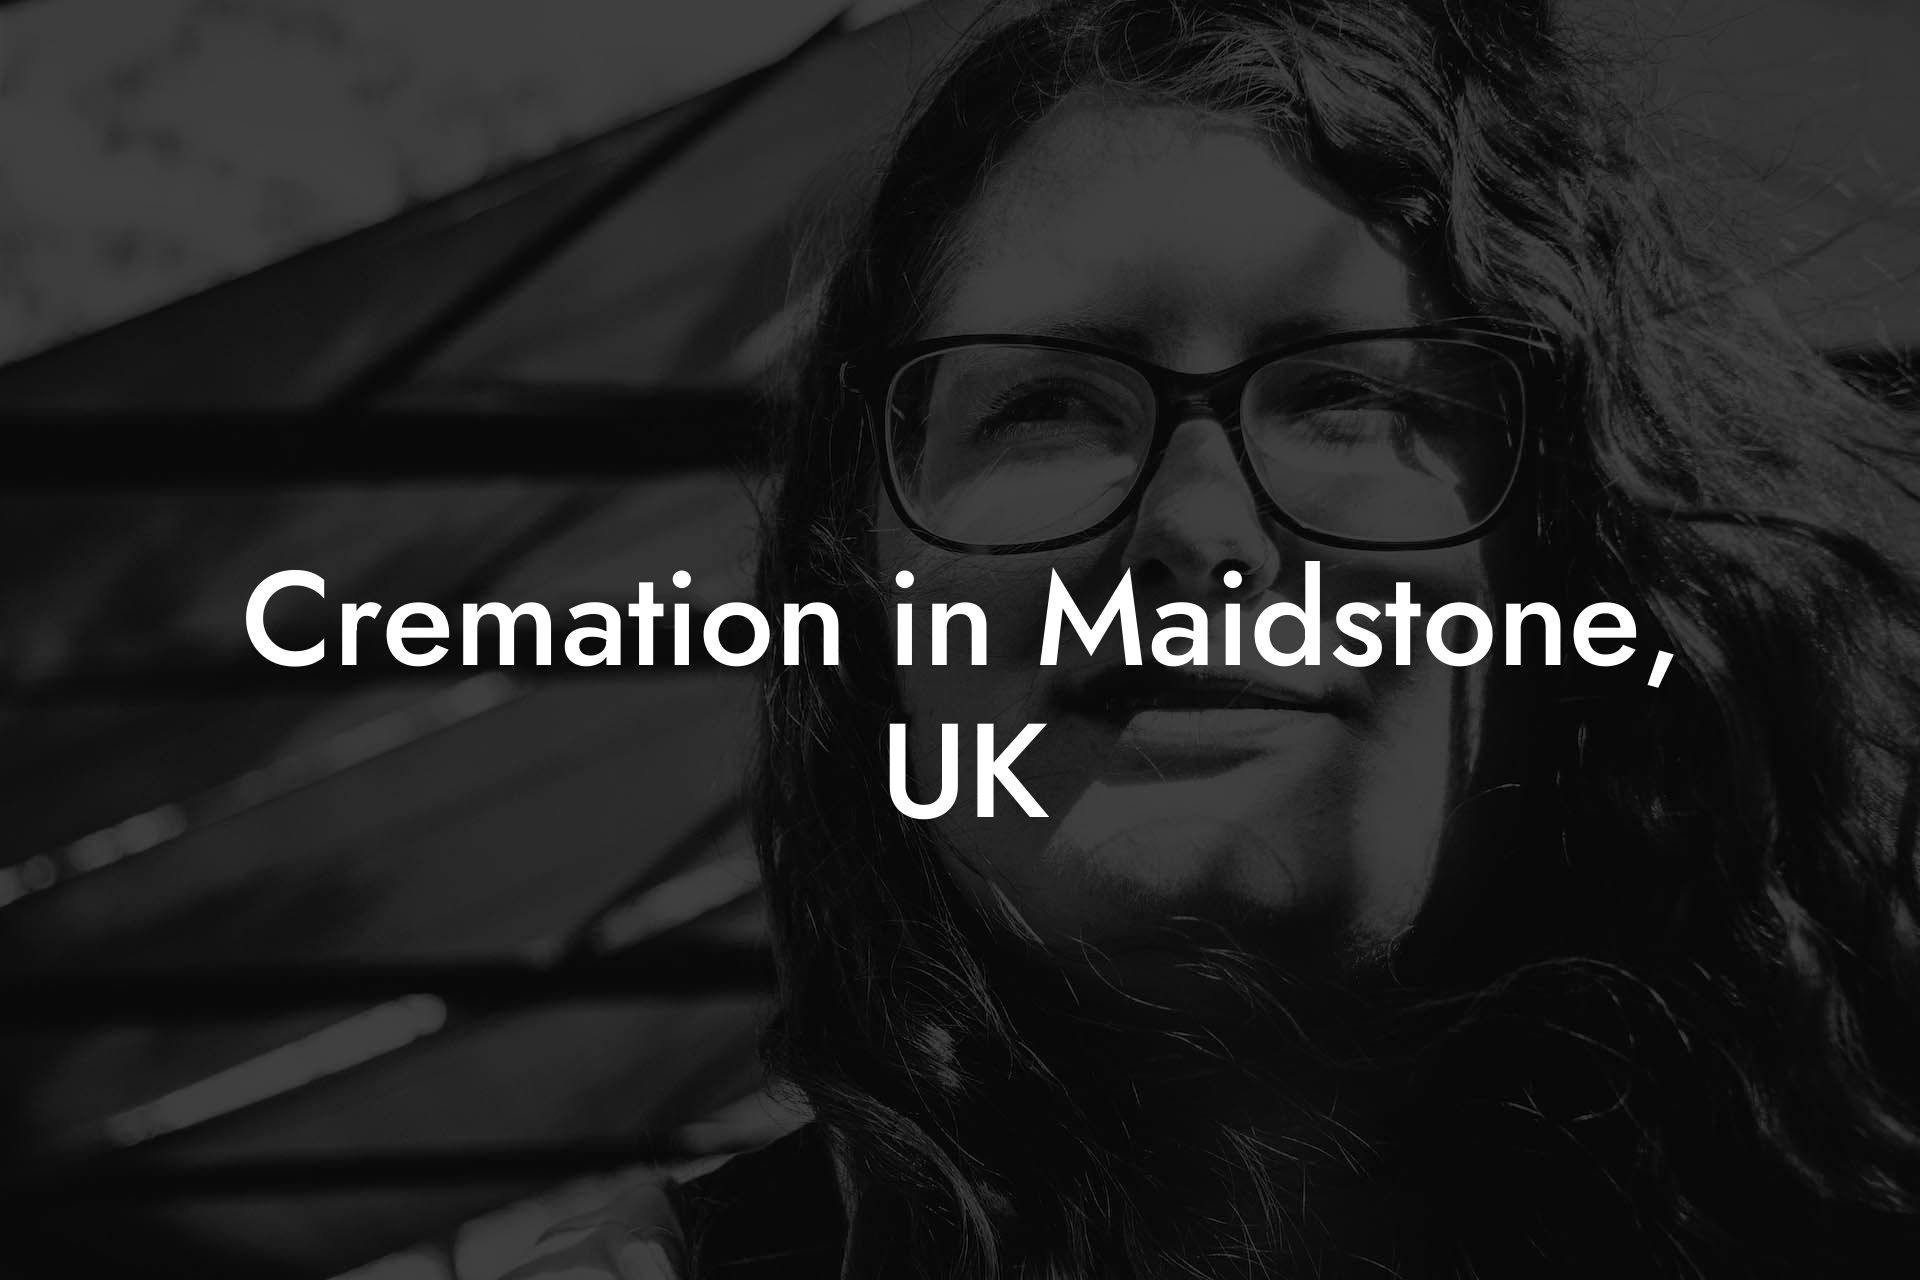 Cremation in Maidstone, UK